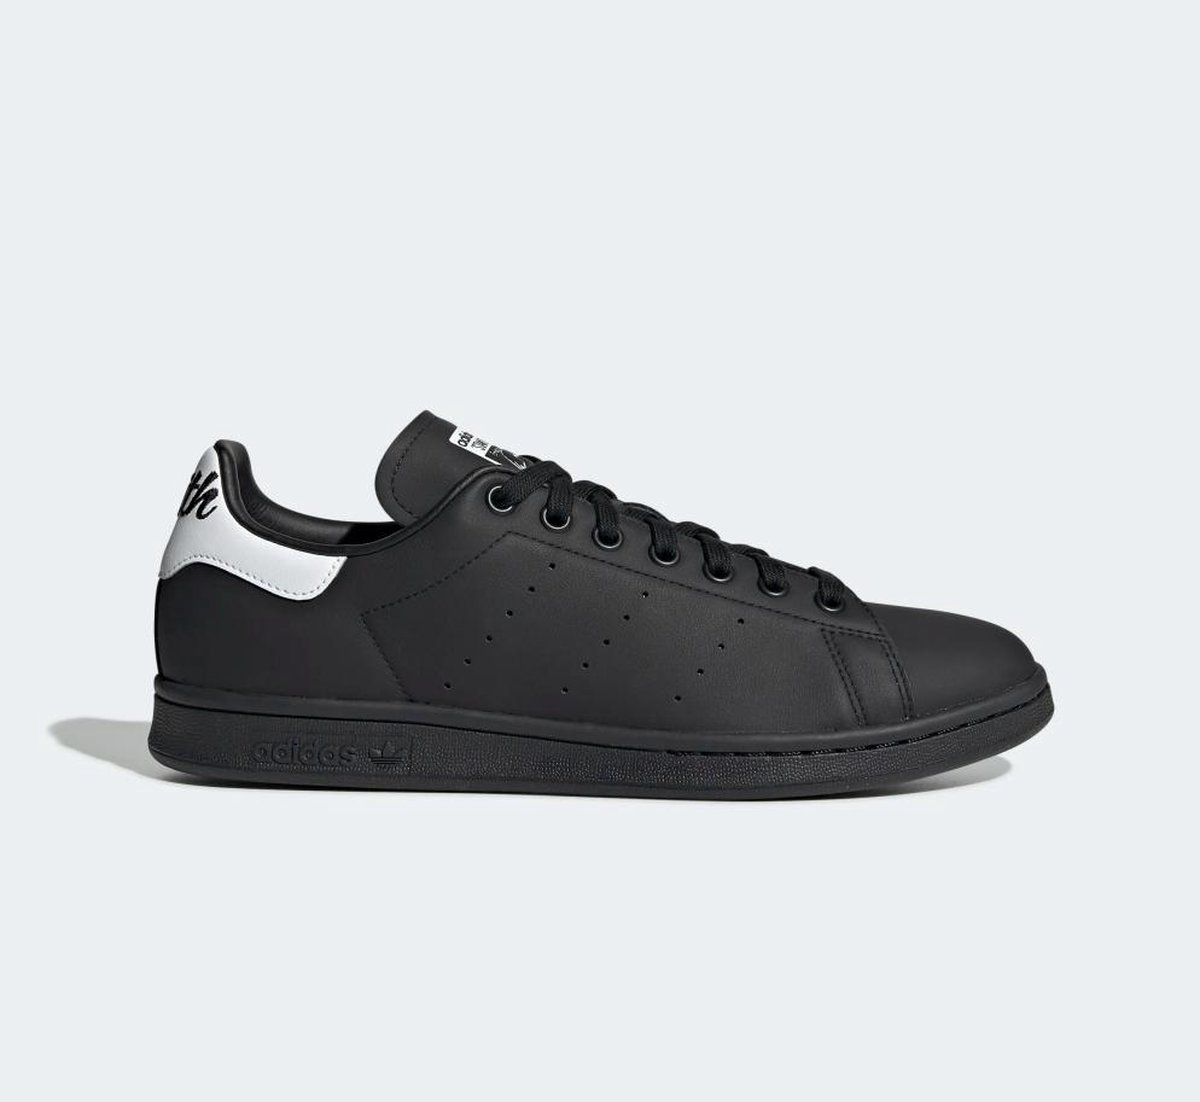 Adidas Stan Smith Noir / Blanc - Baskets pour hommes - EE5819 - Taille 44 |  bol